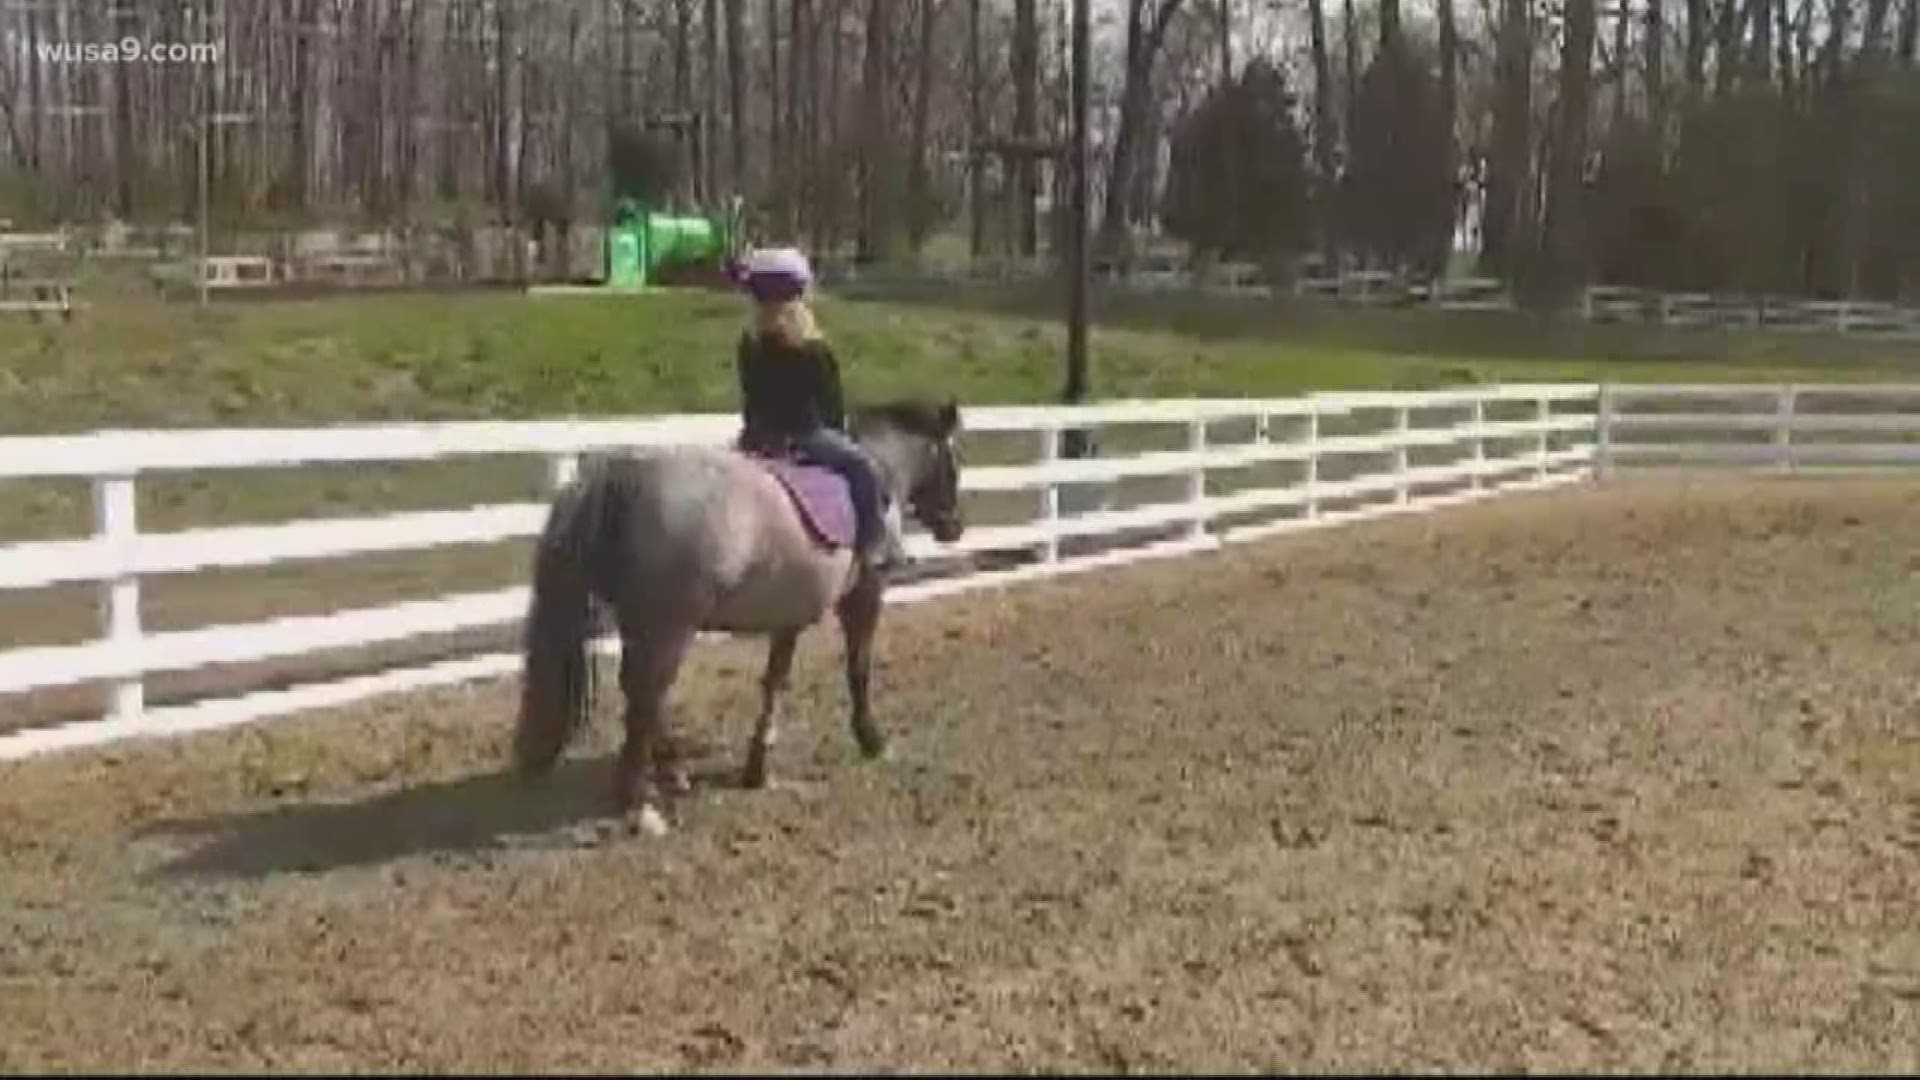 A therapeutic riding program wants to stay connected with the community and share the love of horses.